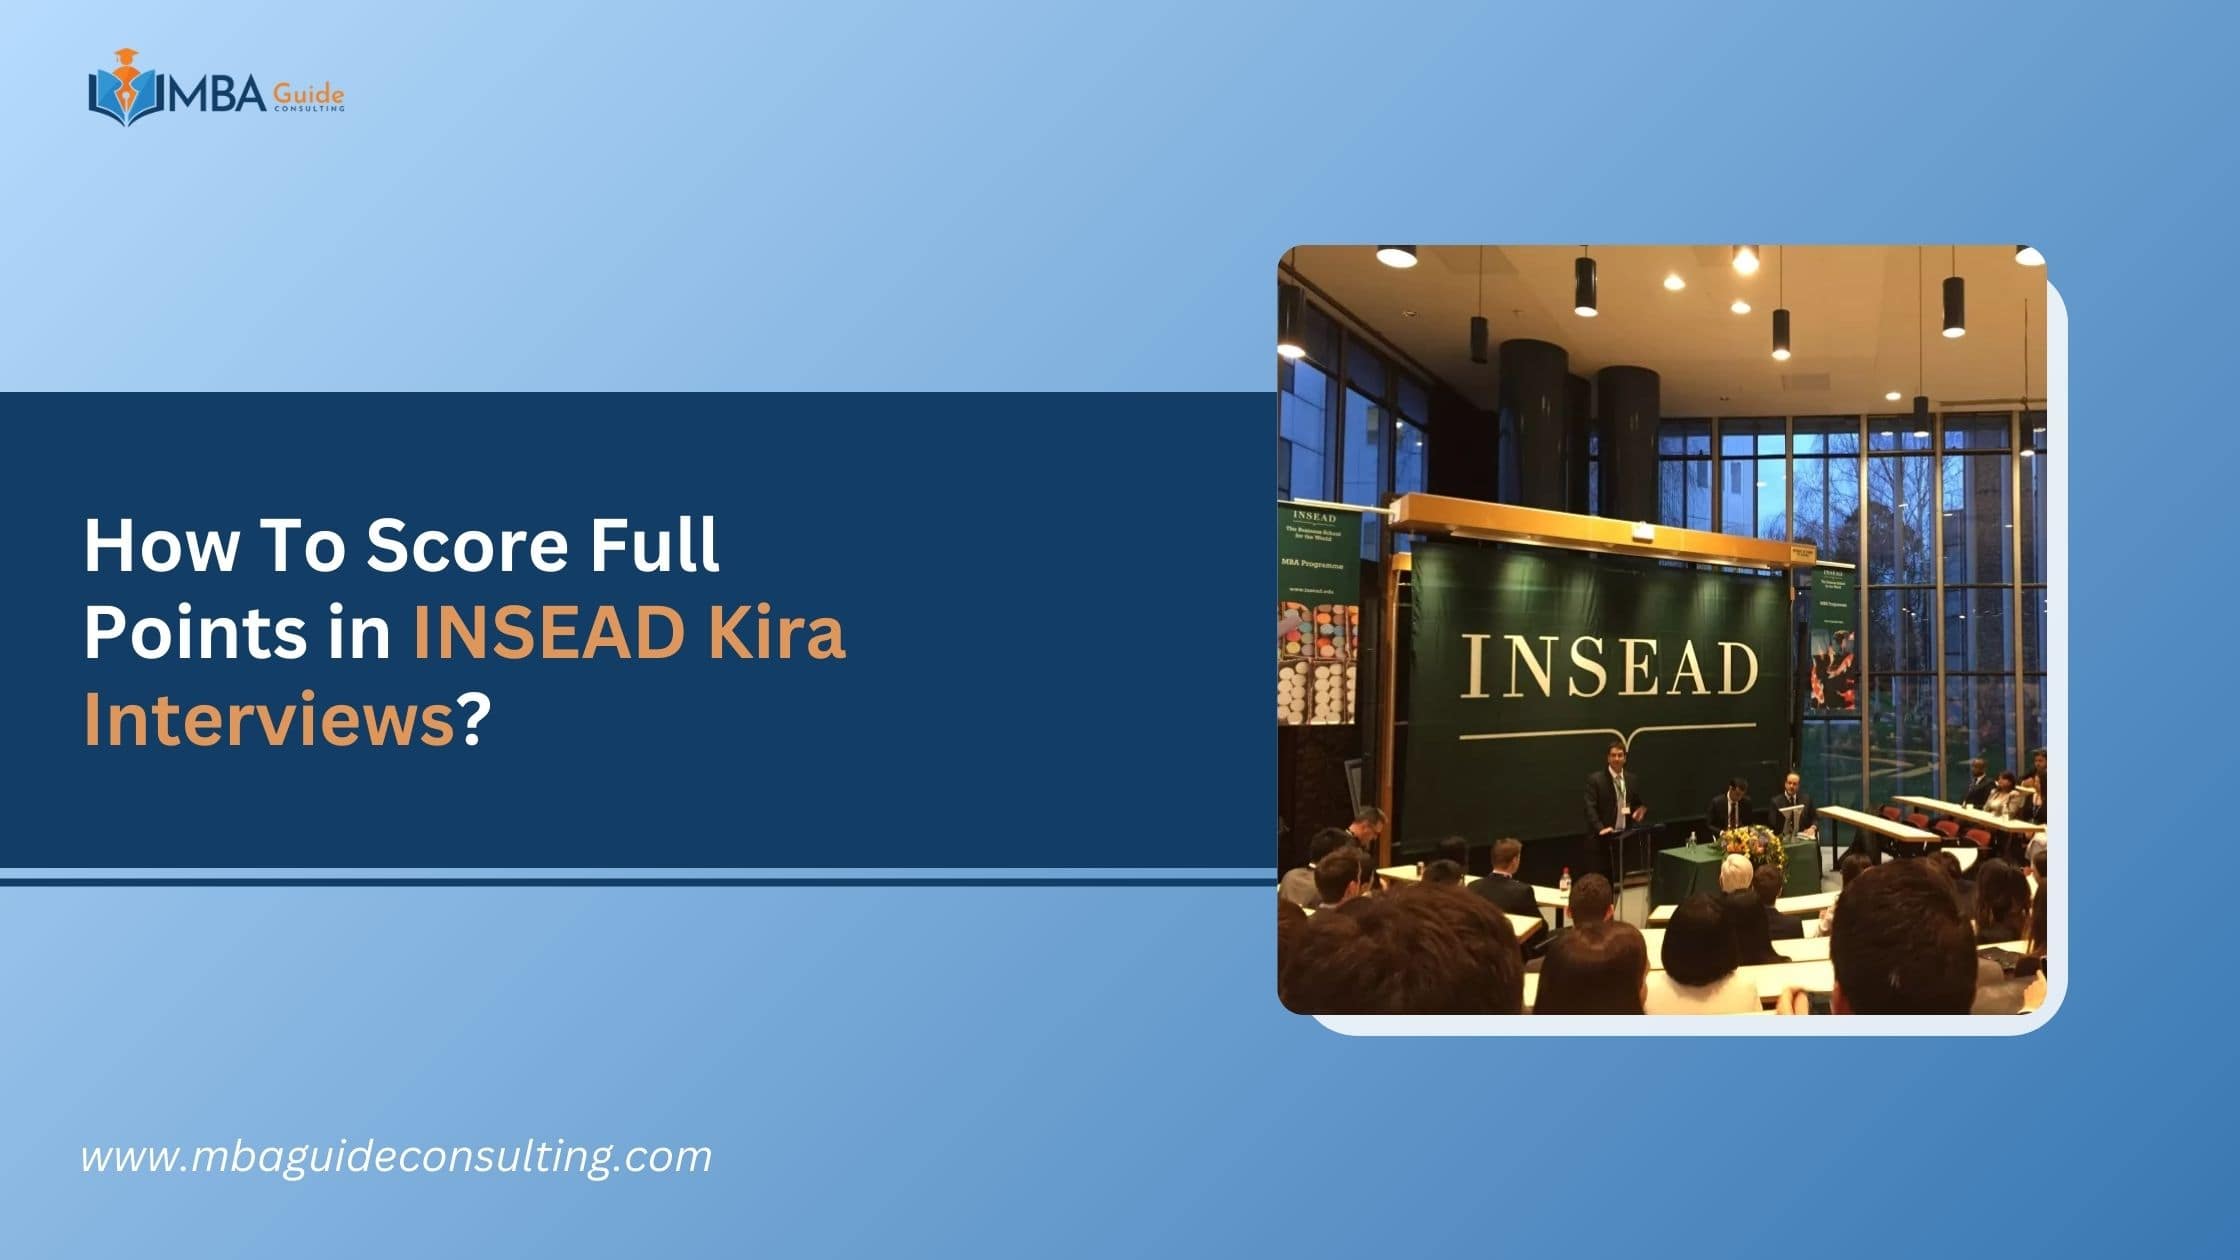 How To Score Full Points in INSEAD Kira Interviews